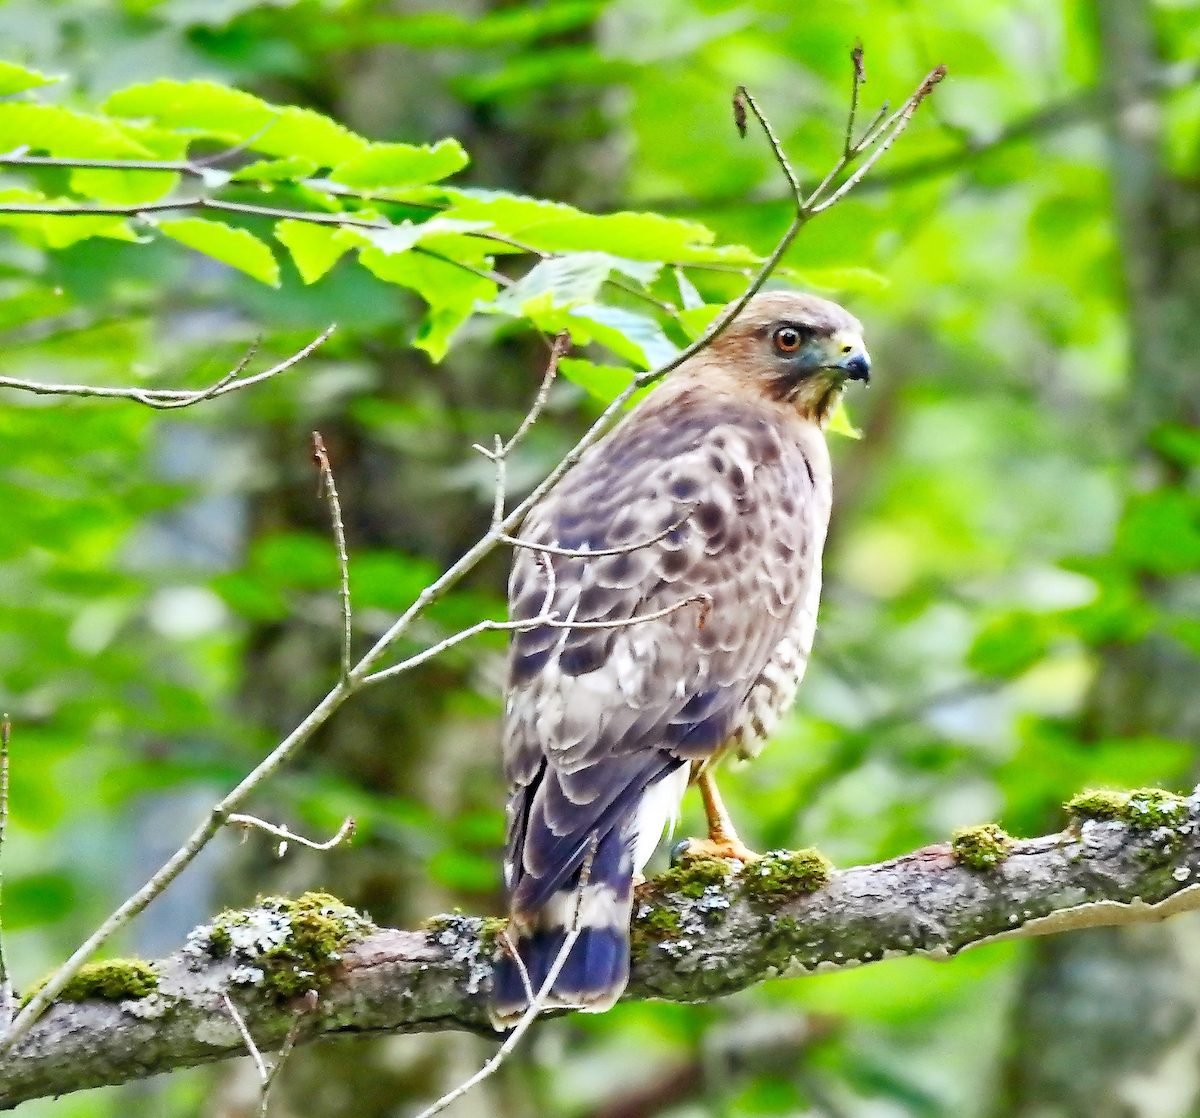 How to Identify a Broad-Winged Hawk